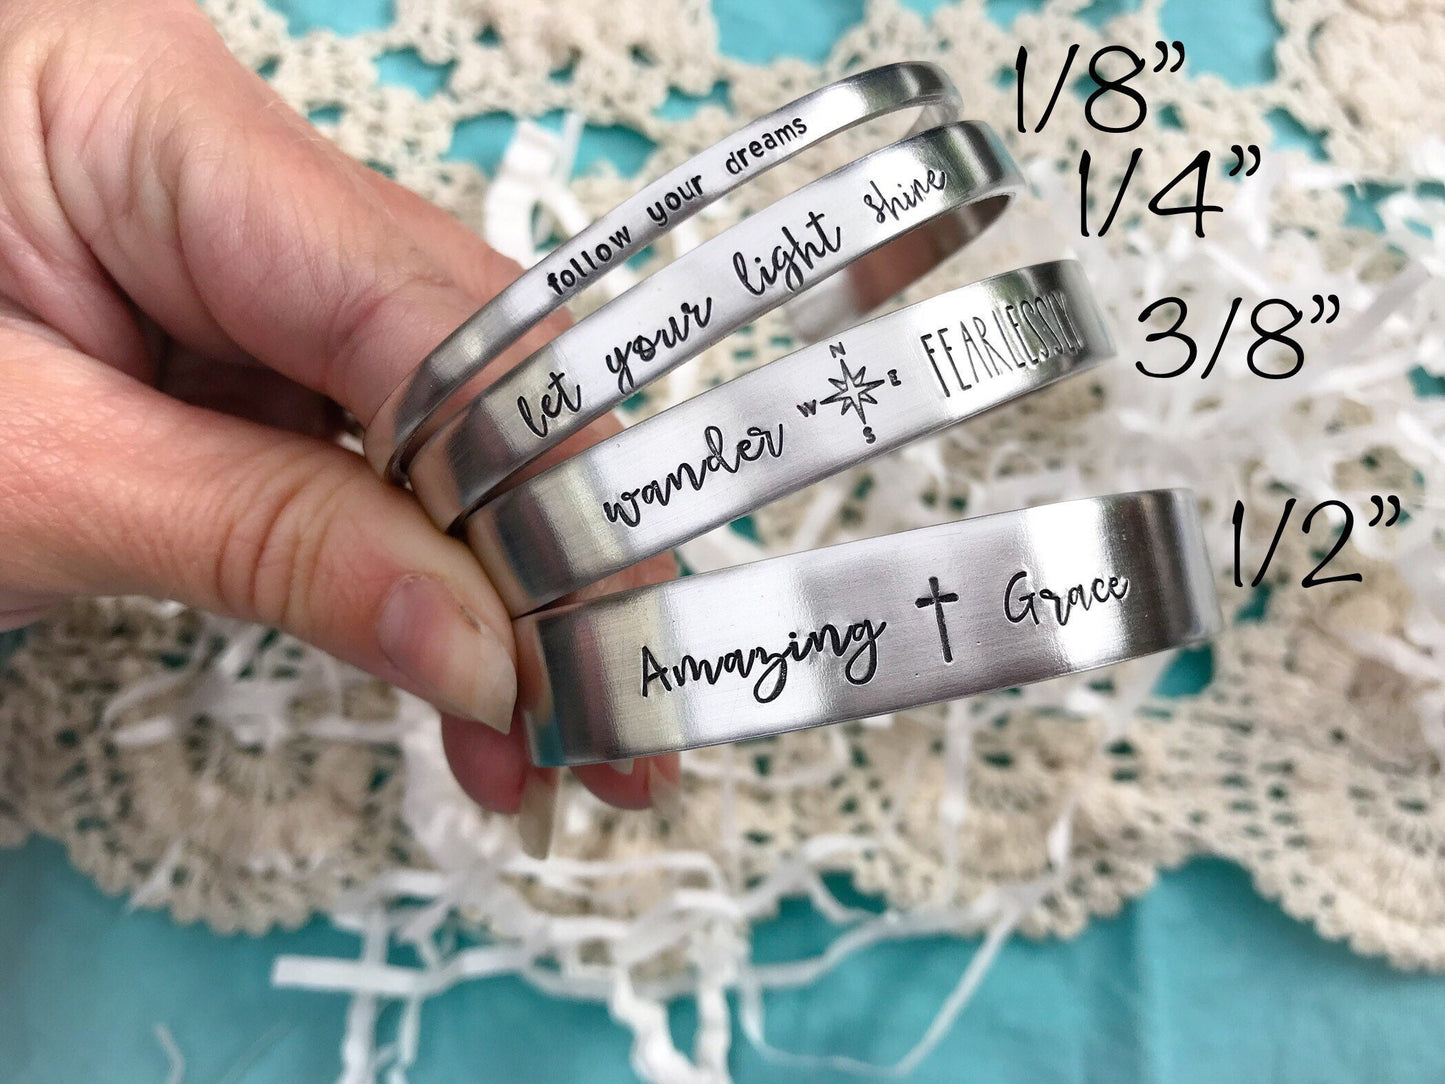 Every moment matters cuff bracelet--enjoy the moment--live in the moment